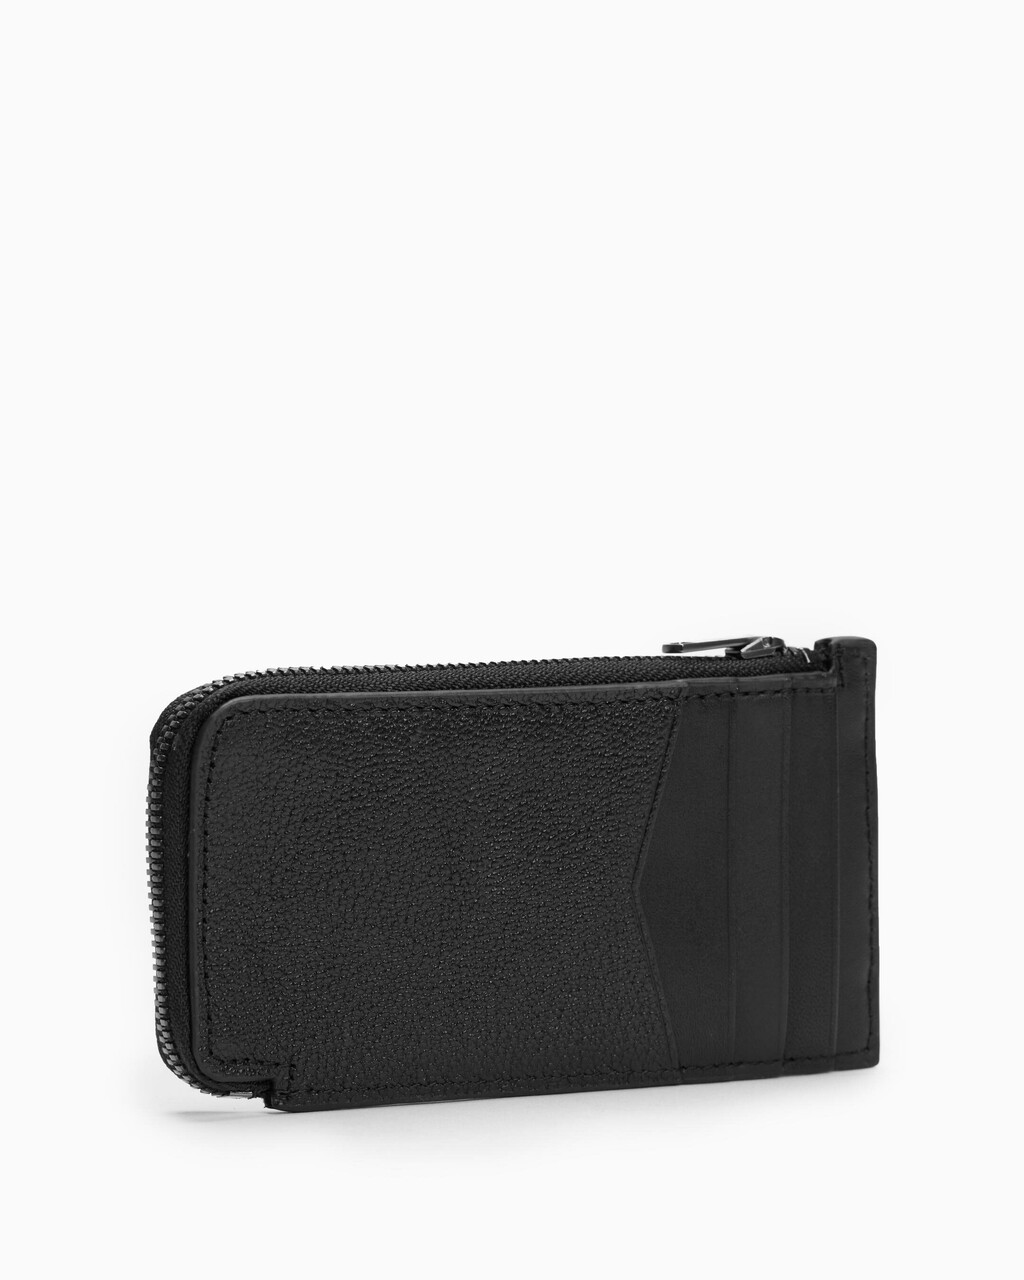 MICRO PEBBLE J ZIP CARD AND COIN CASE, BLACK, hi-res